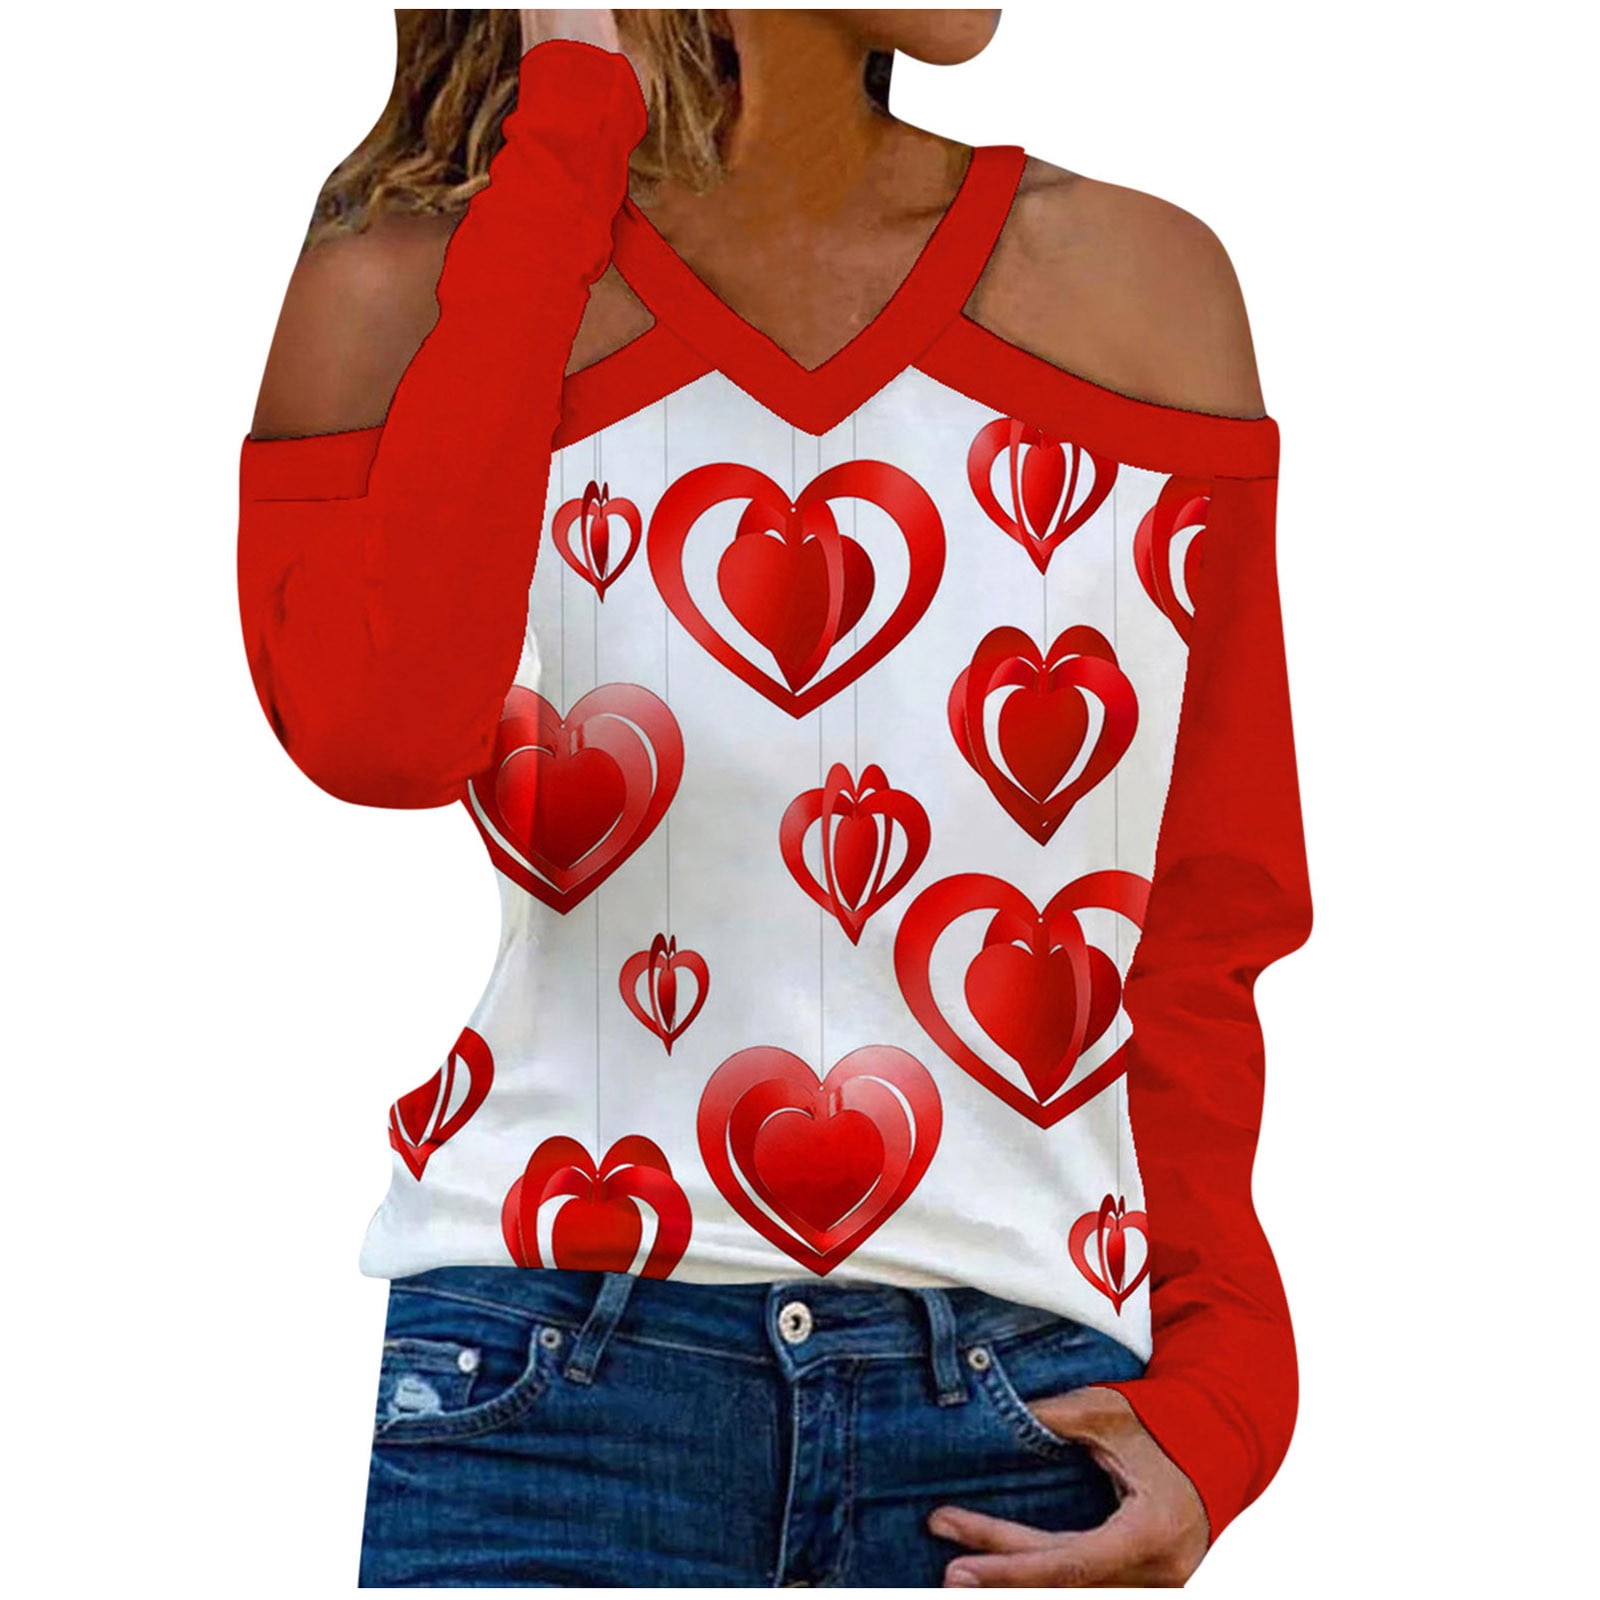 Womens V Neck T Shirts Lace Up Sweet Heart Print,clearence in Prime Under 5,Cute  Stuff Under 5 Dollars,Return Pallet,Todays Deals Clearance Prime